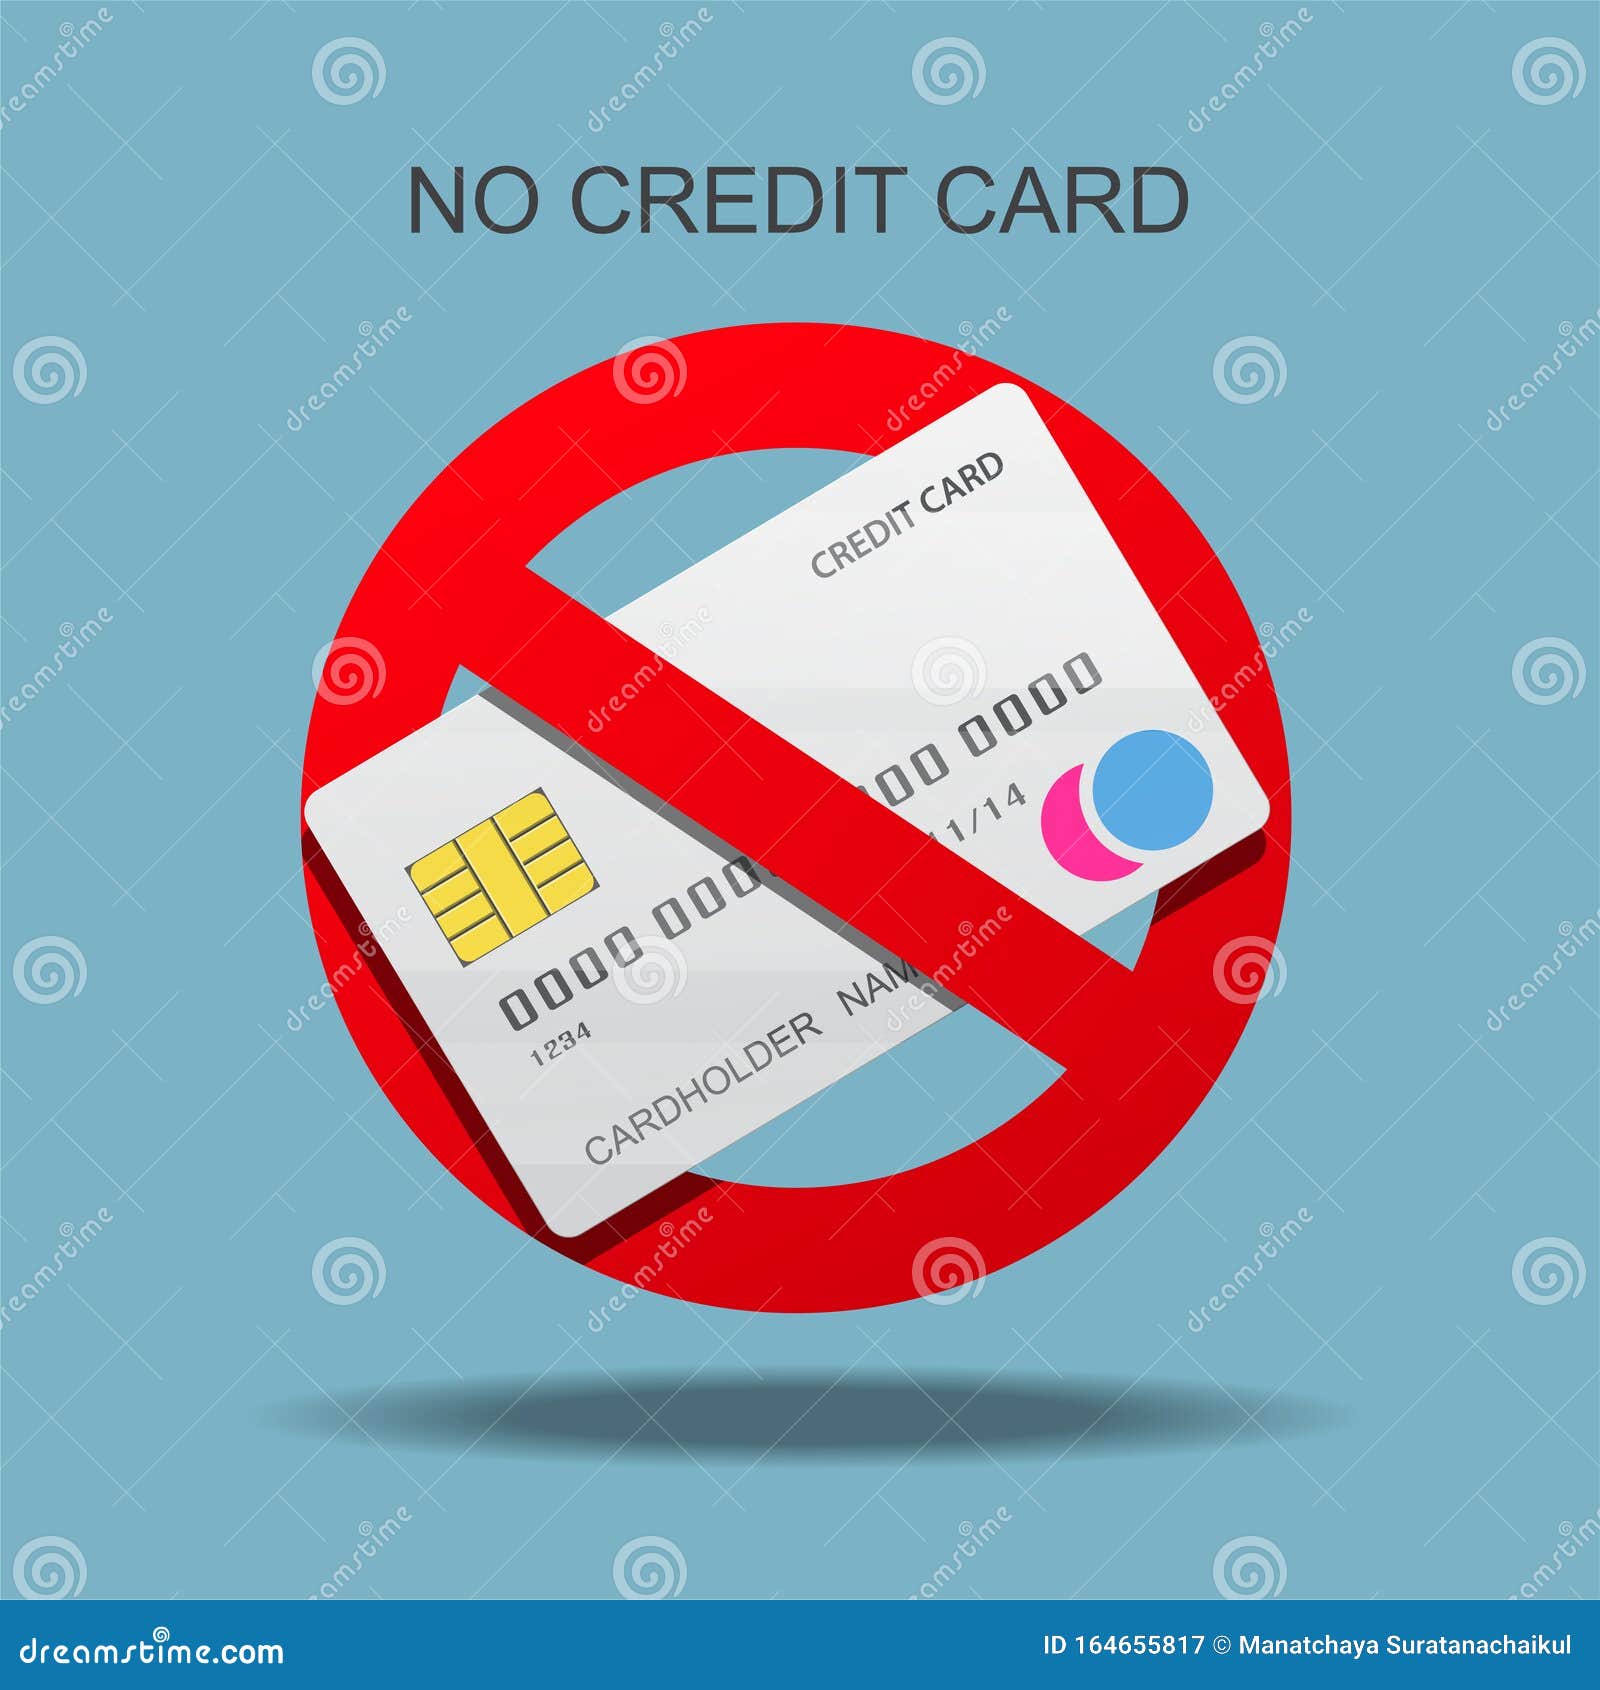 no credit card allowed sign